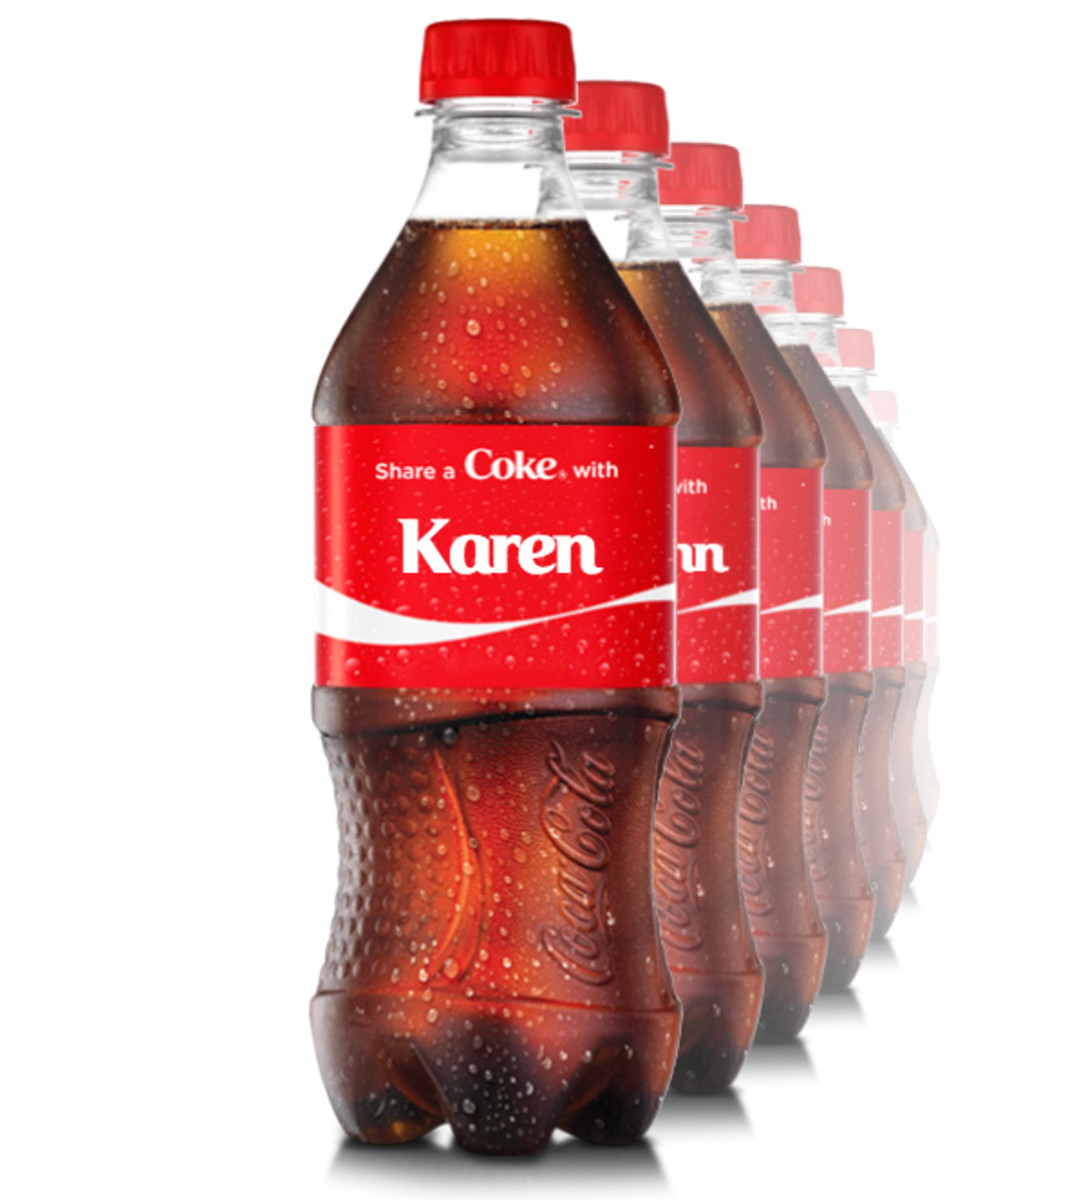 personalized coke labels_share a coke with Karen